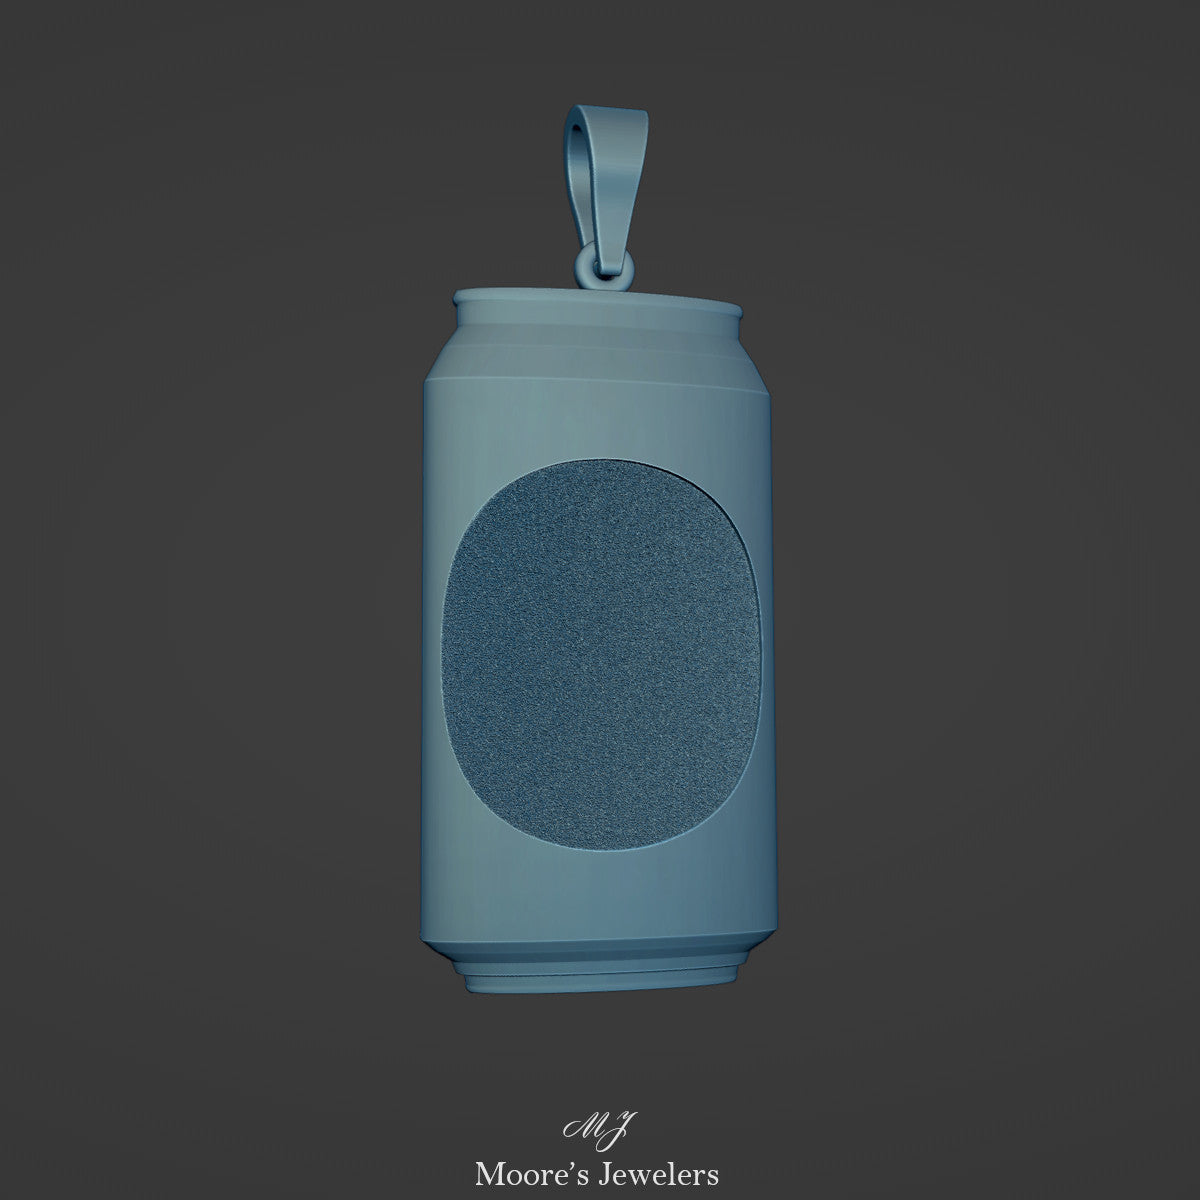 Textured Beer or Soda Can Pendant 3d Model